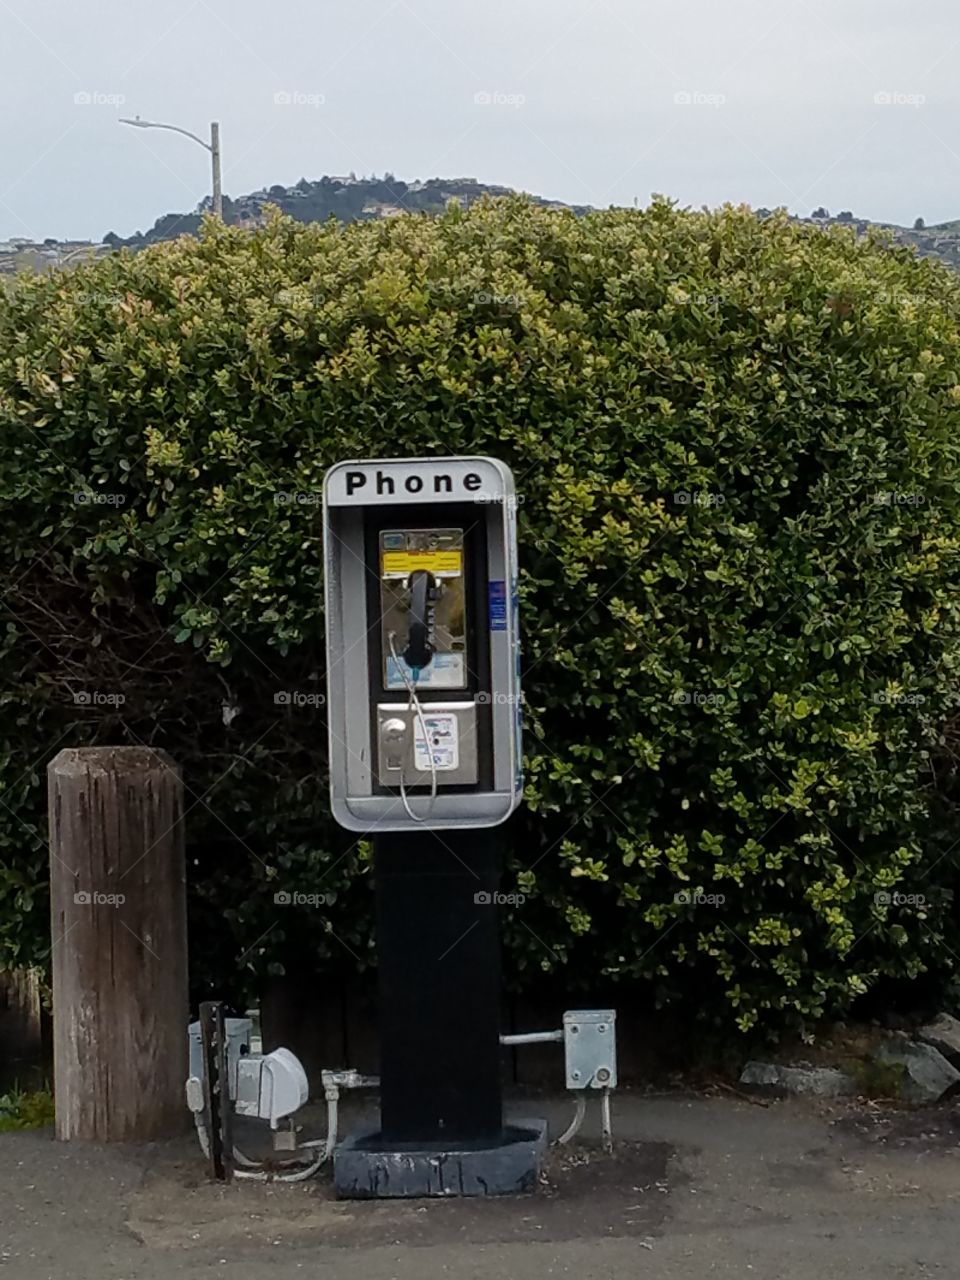 A Phone Booth?